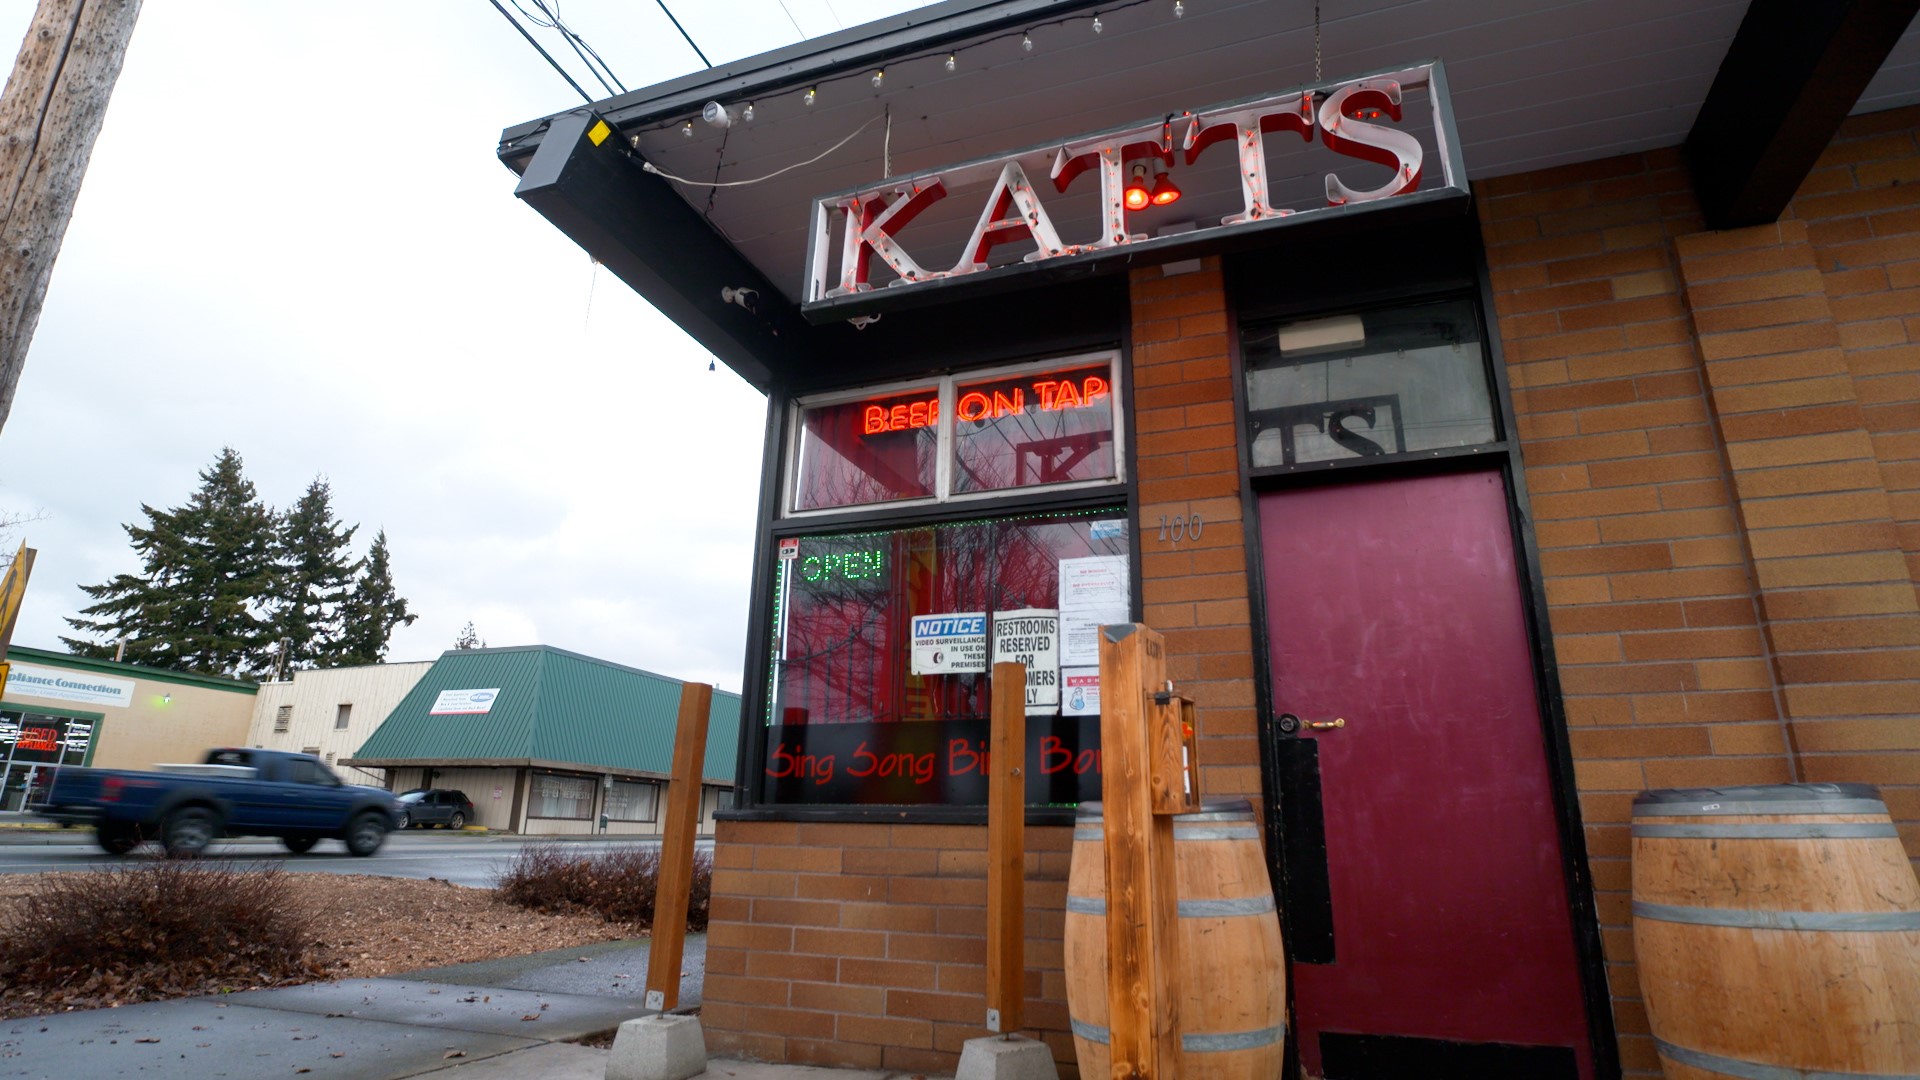 Katt's Westside Stories is a small dive bar with a lot of energy. #k5evening